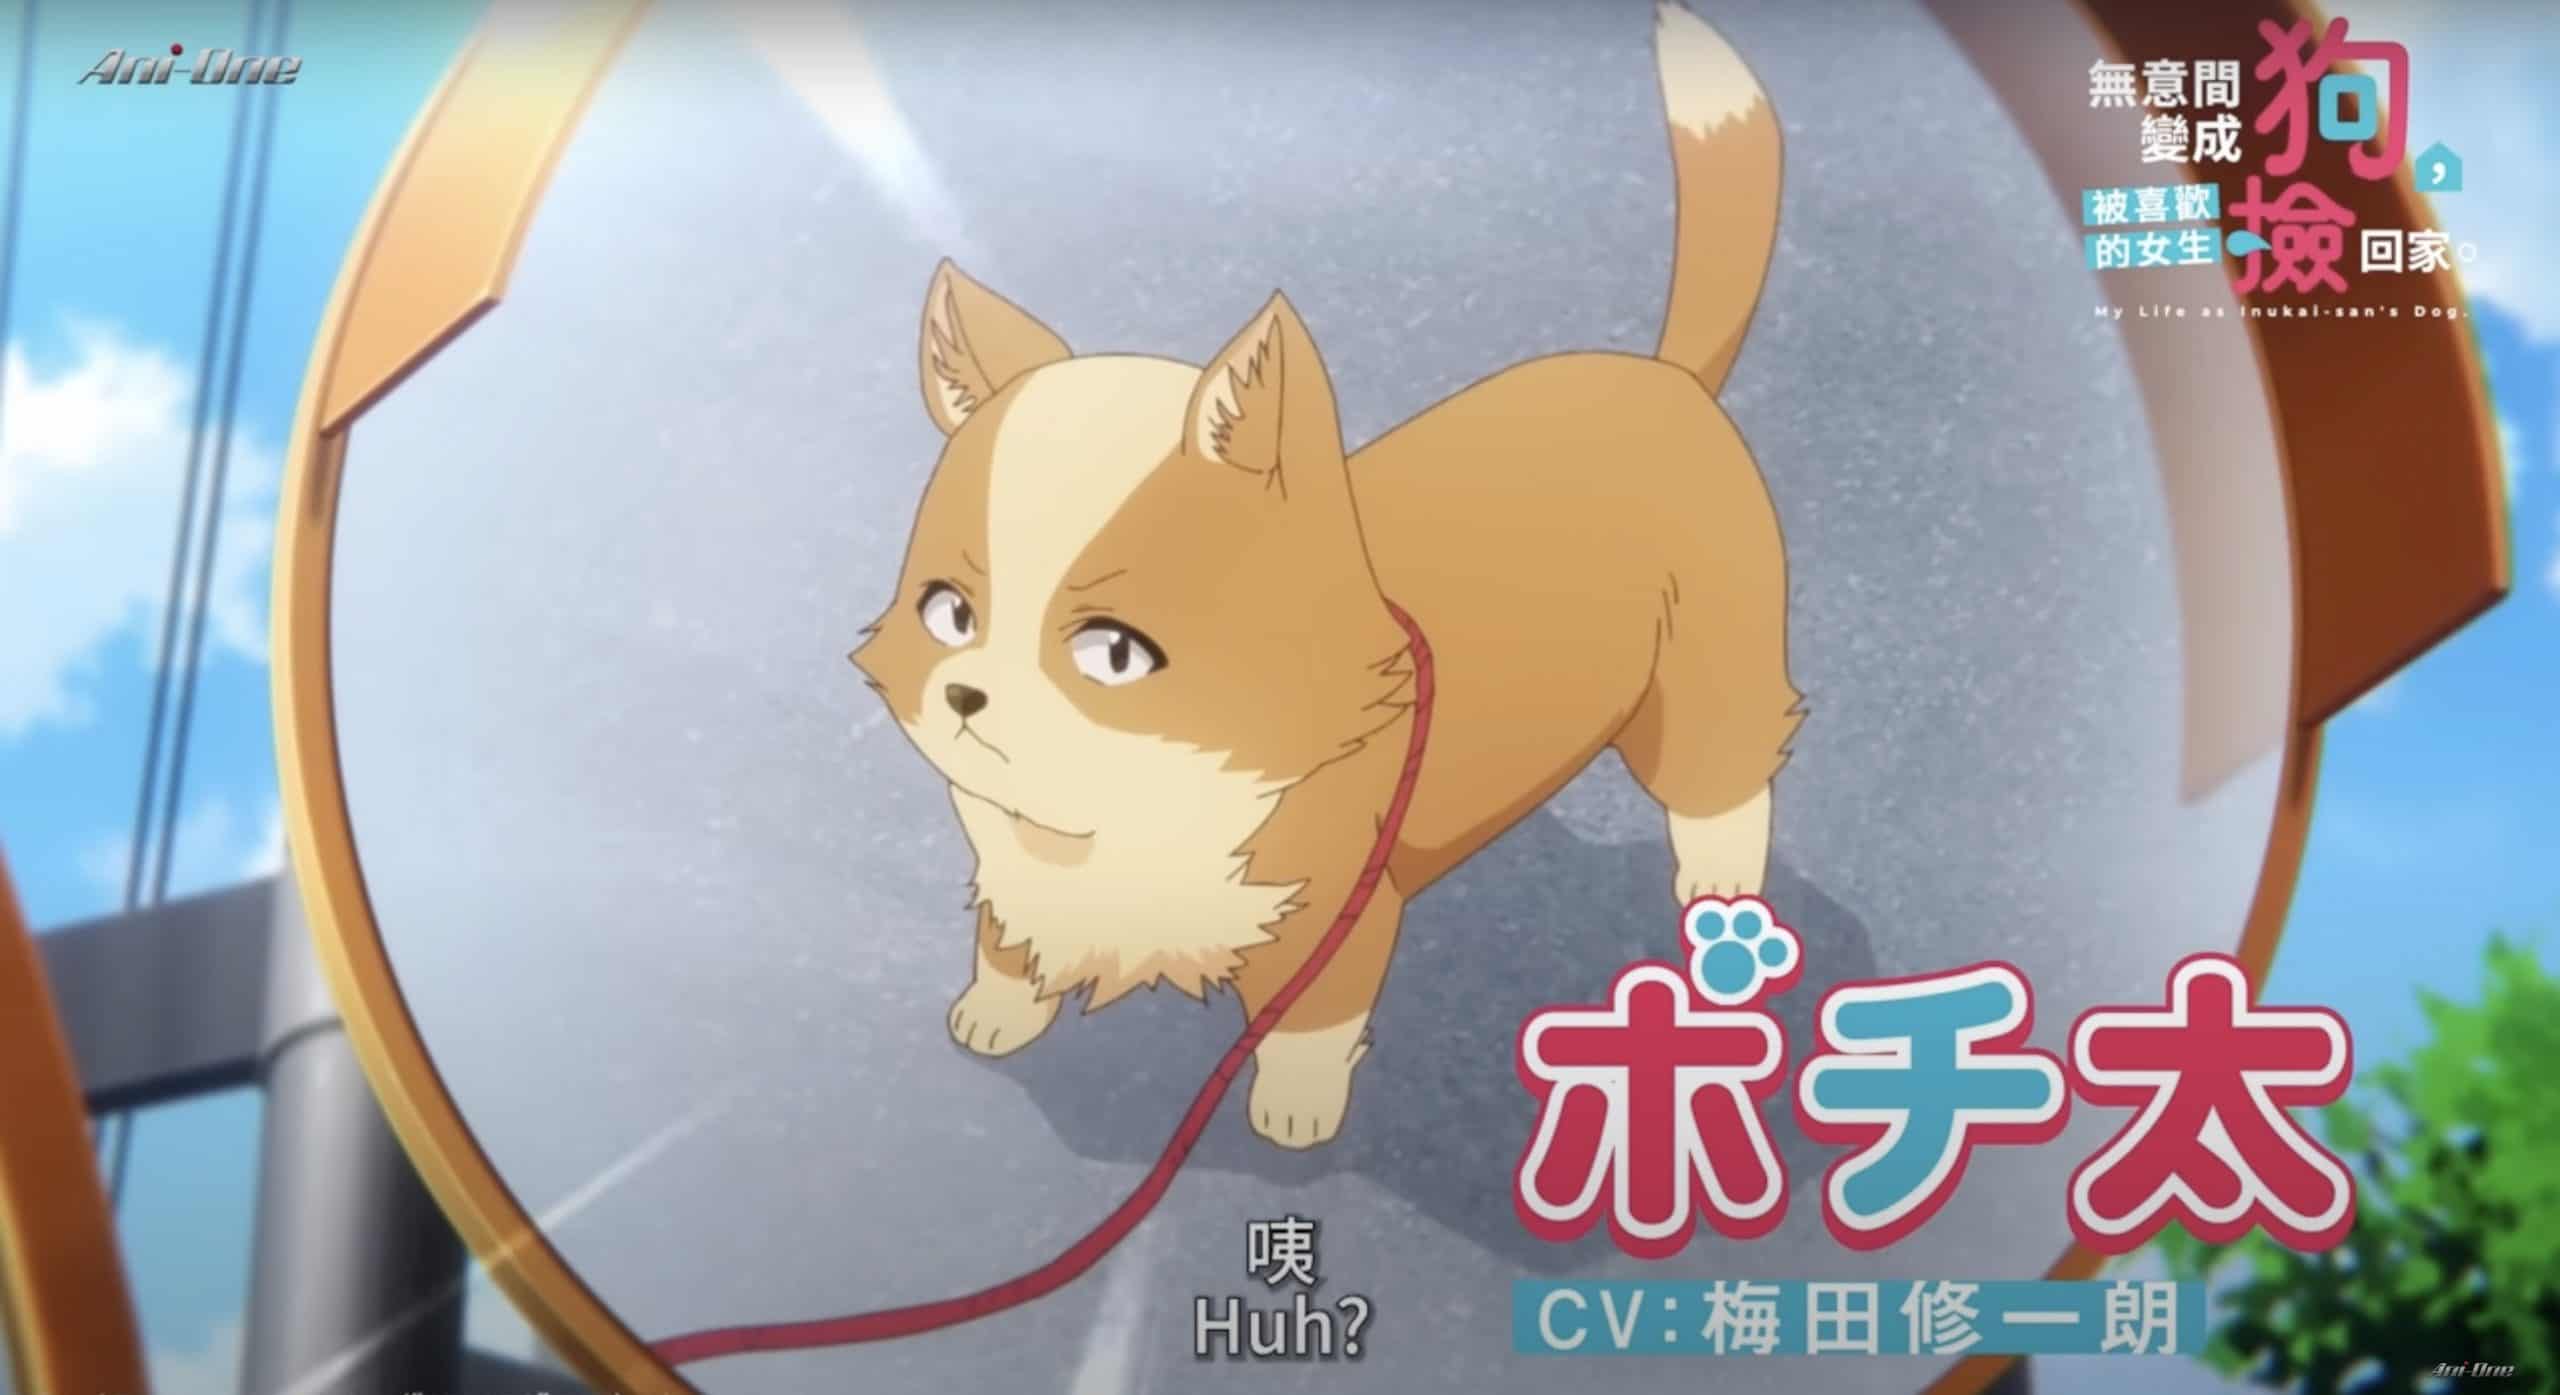 My Life as Inukai-san's Dog Episode 9 Release Date: It is Pochita and Inukai's School Day